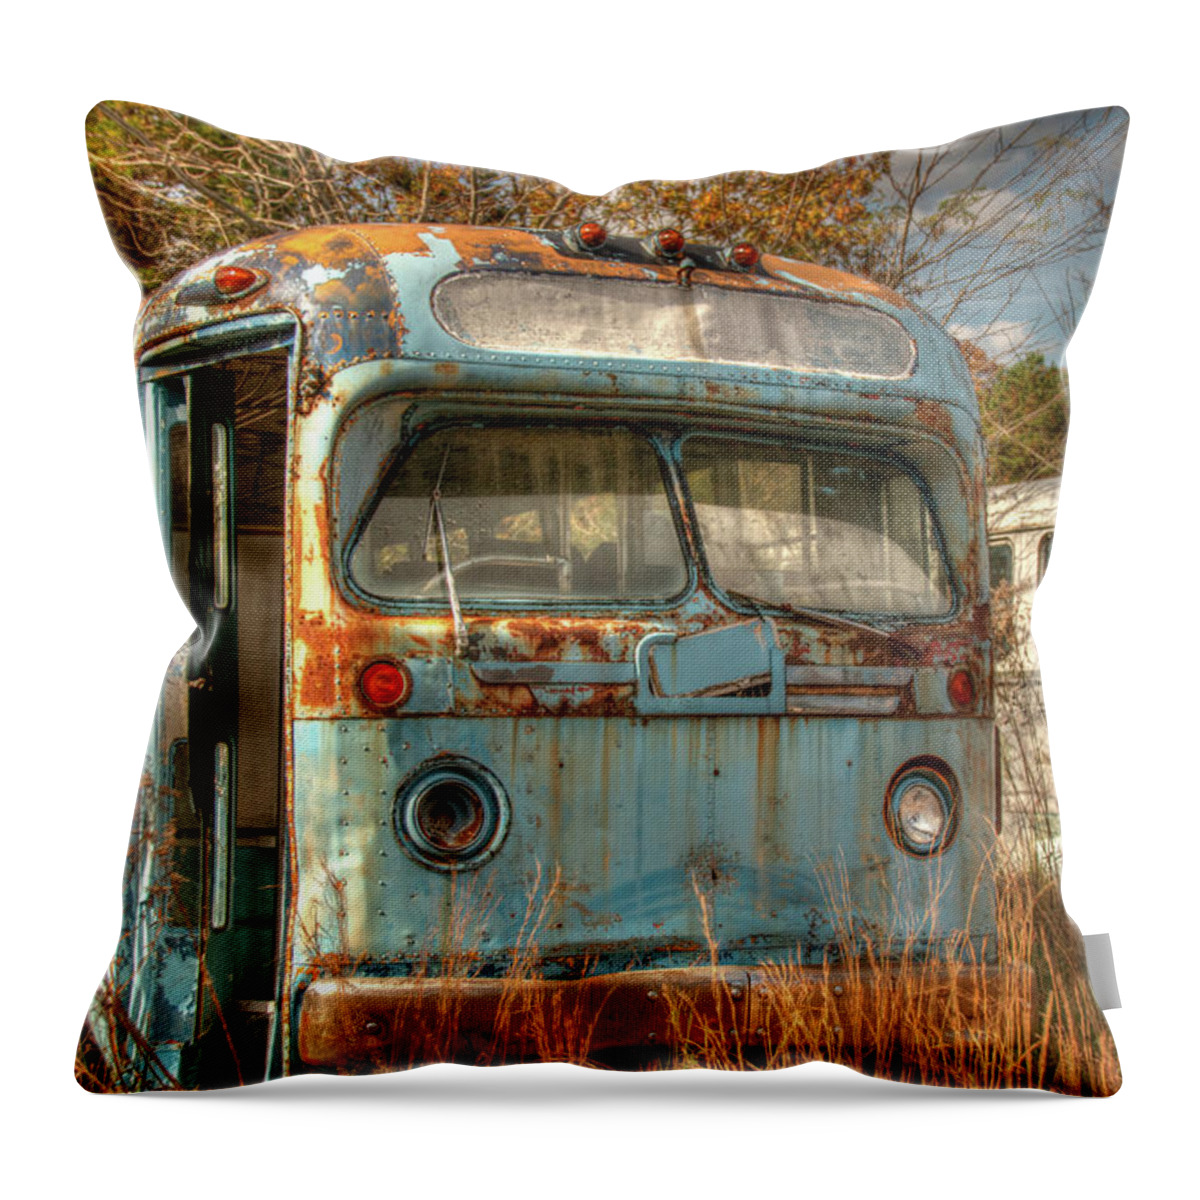 Abandon Throw Pillow featuring the photograph The Quiet Bus Graveyard by Kristia Adams